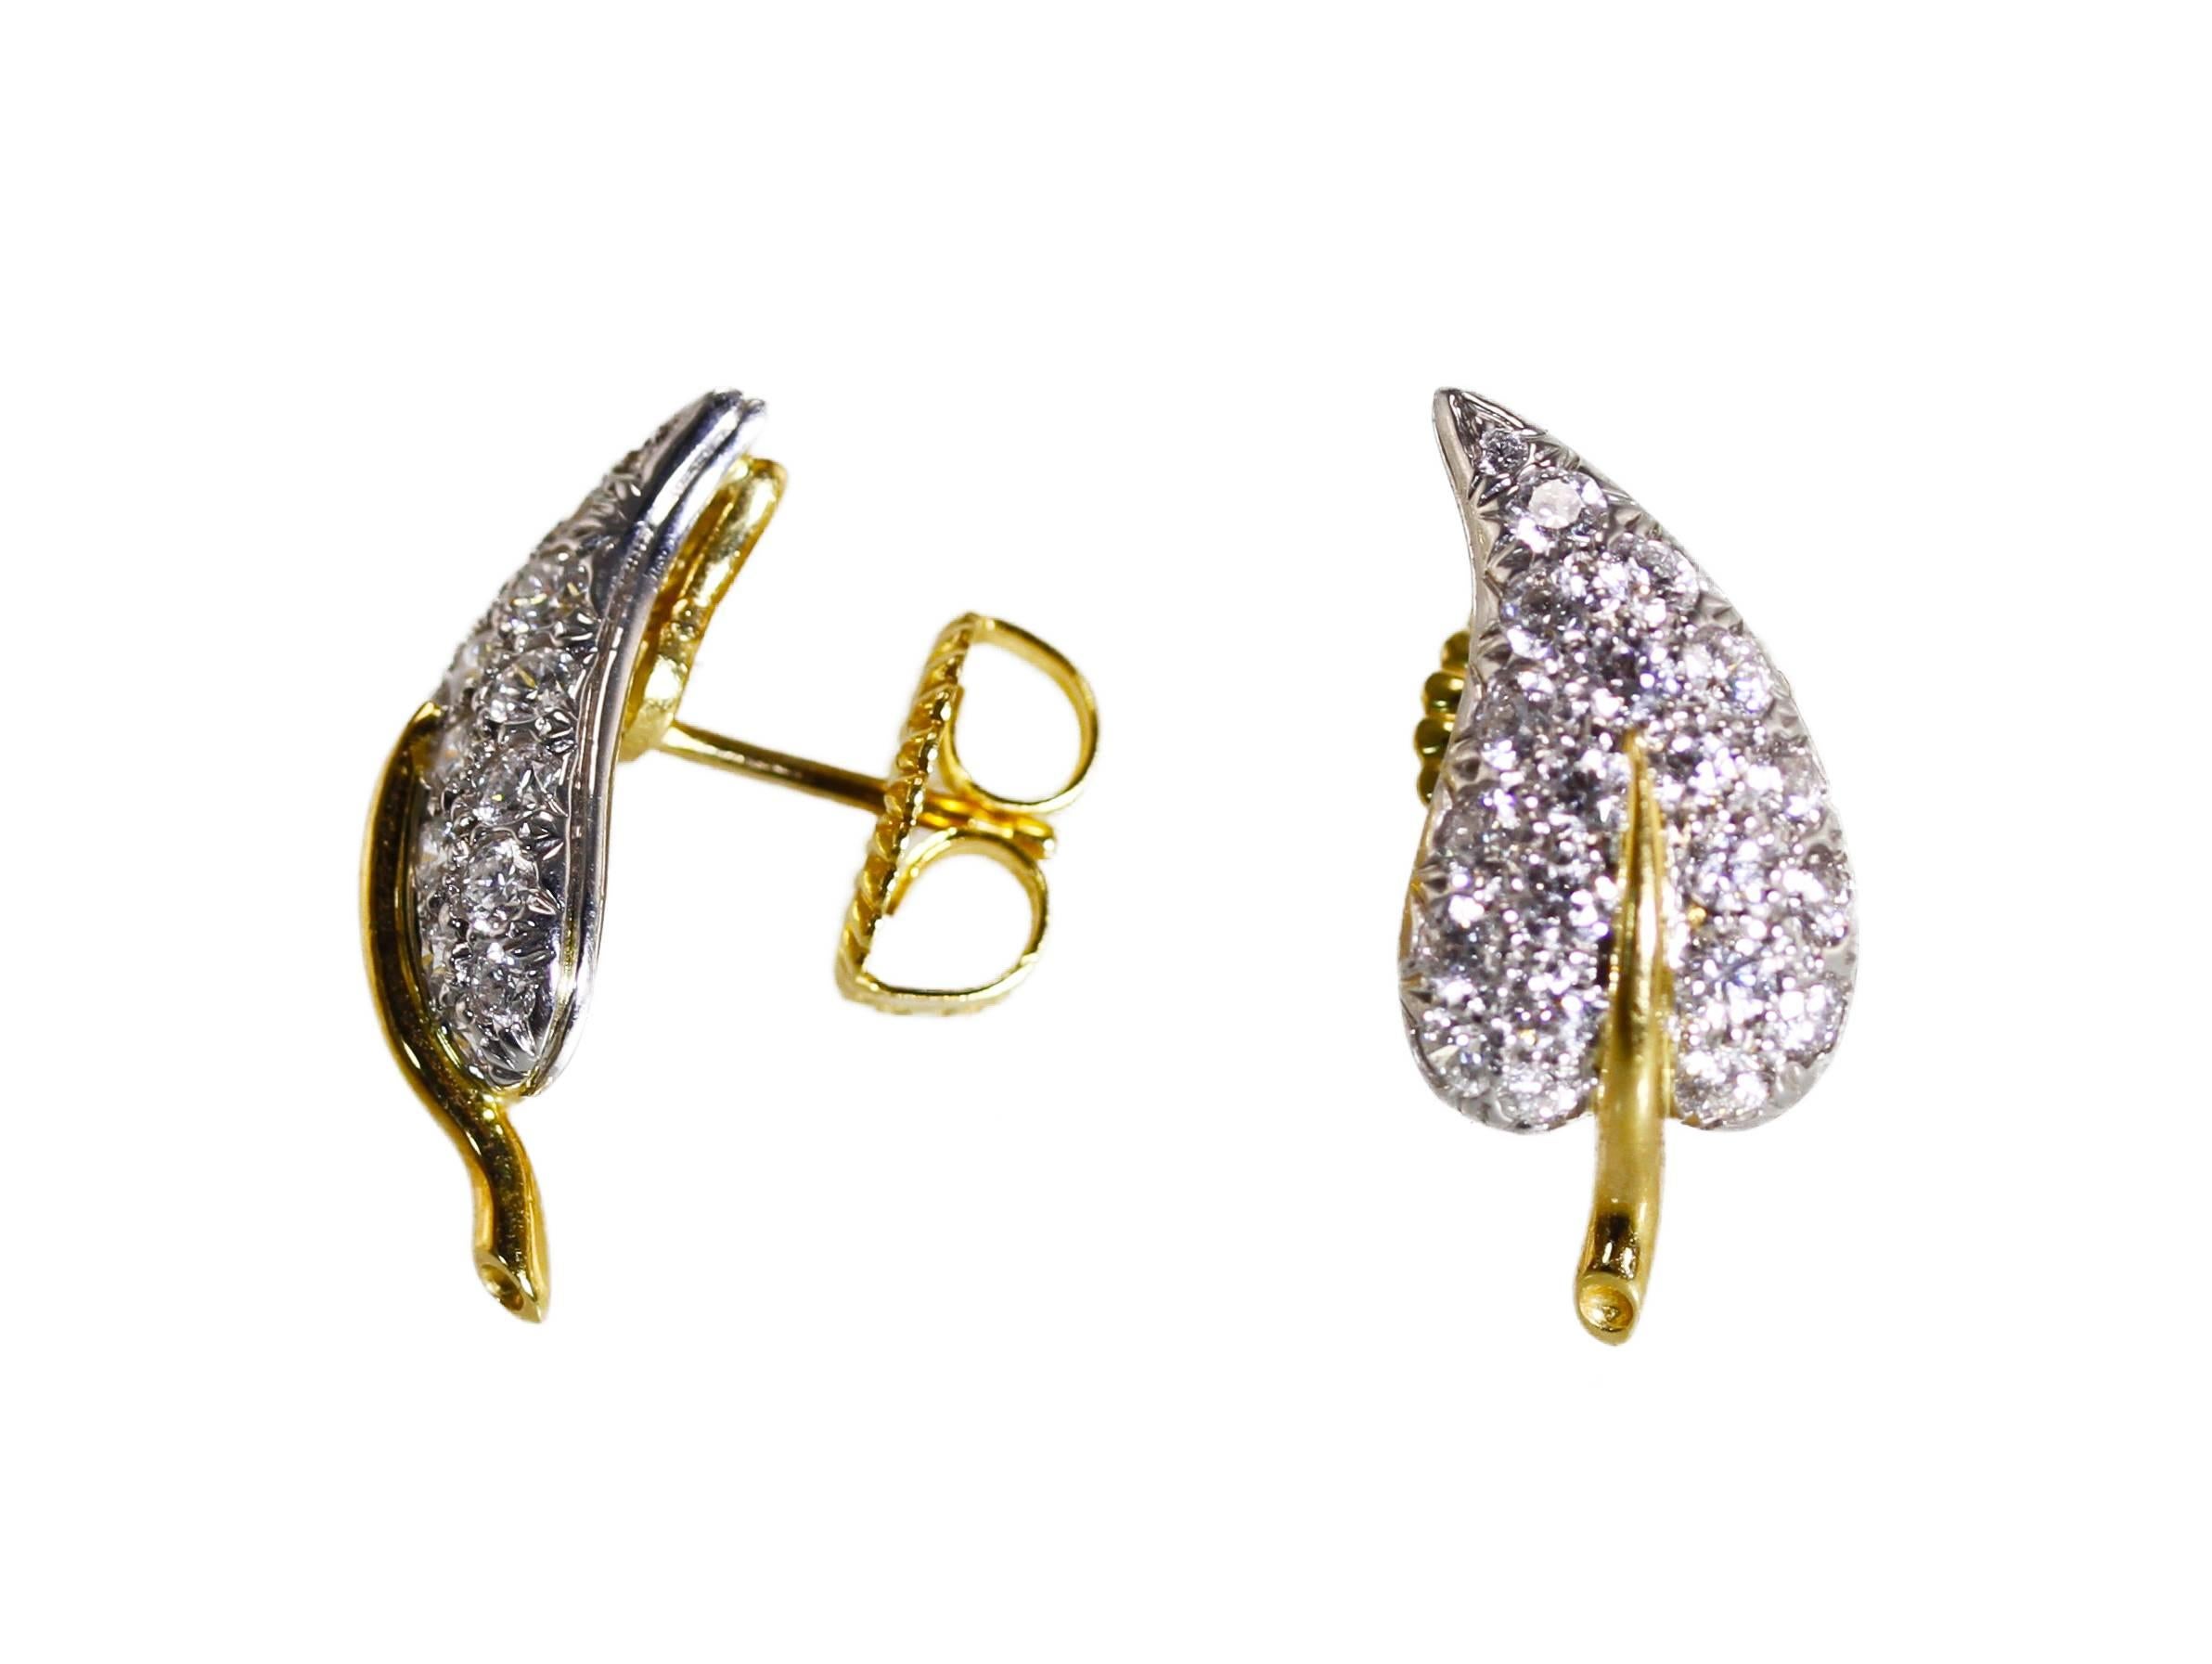 Pair of platinum, 18 karat gold and diamond earrings by Schlumberger for Tiffany & Co., each designed as a slightly curved leaf, set with 42 round diamonds weighing approximately 1.50 carats, measuring 3/4 by 3/8 inch, gross weight 7.0 grams, signed